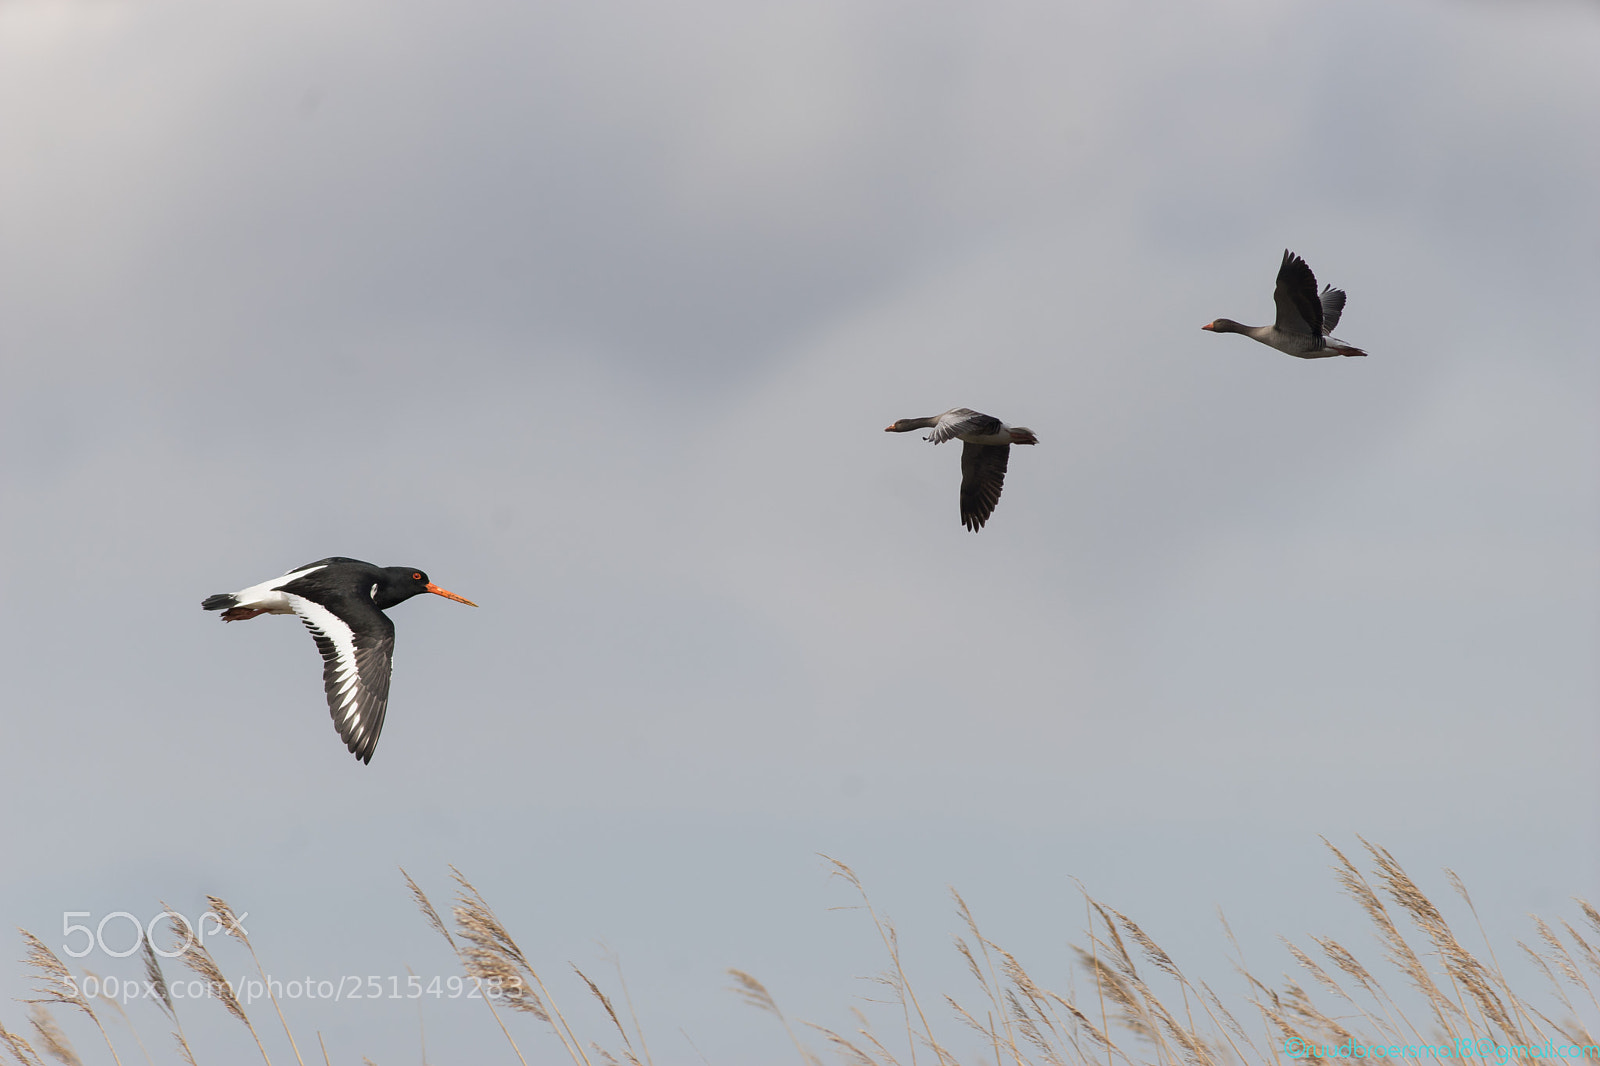 Sony a7 II sample photo. In flight scholekster haematopus photography